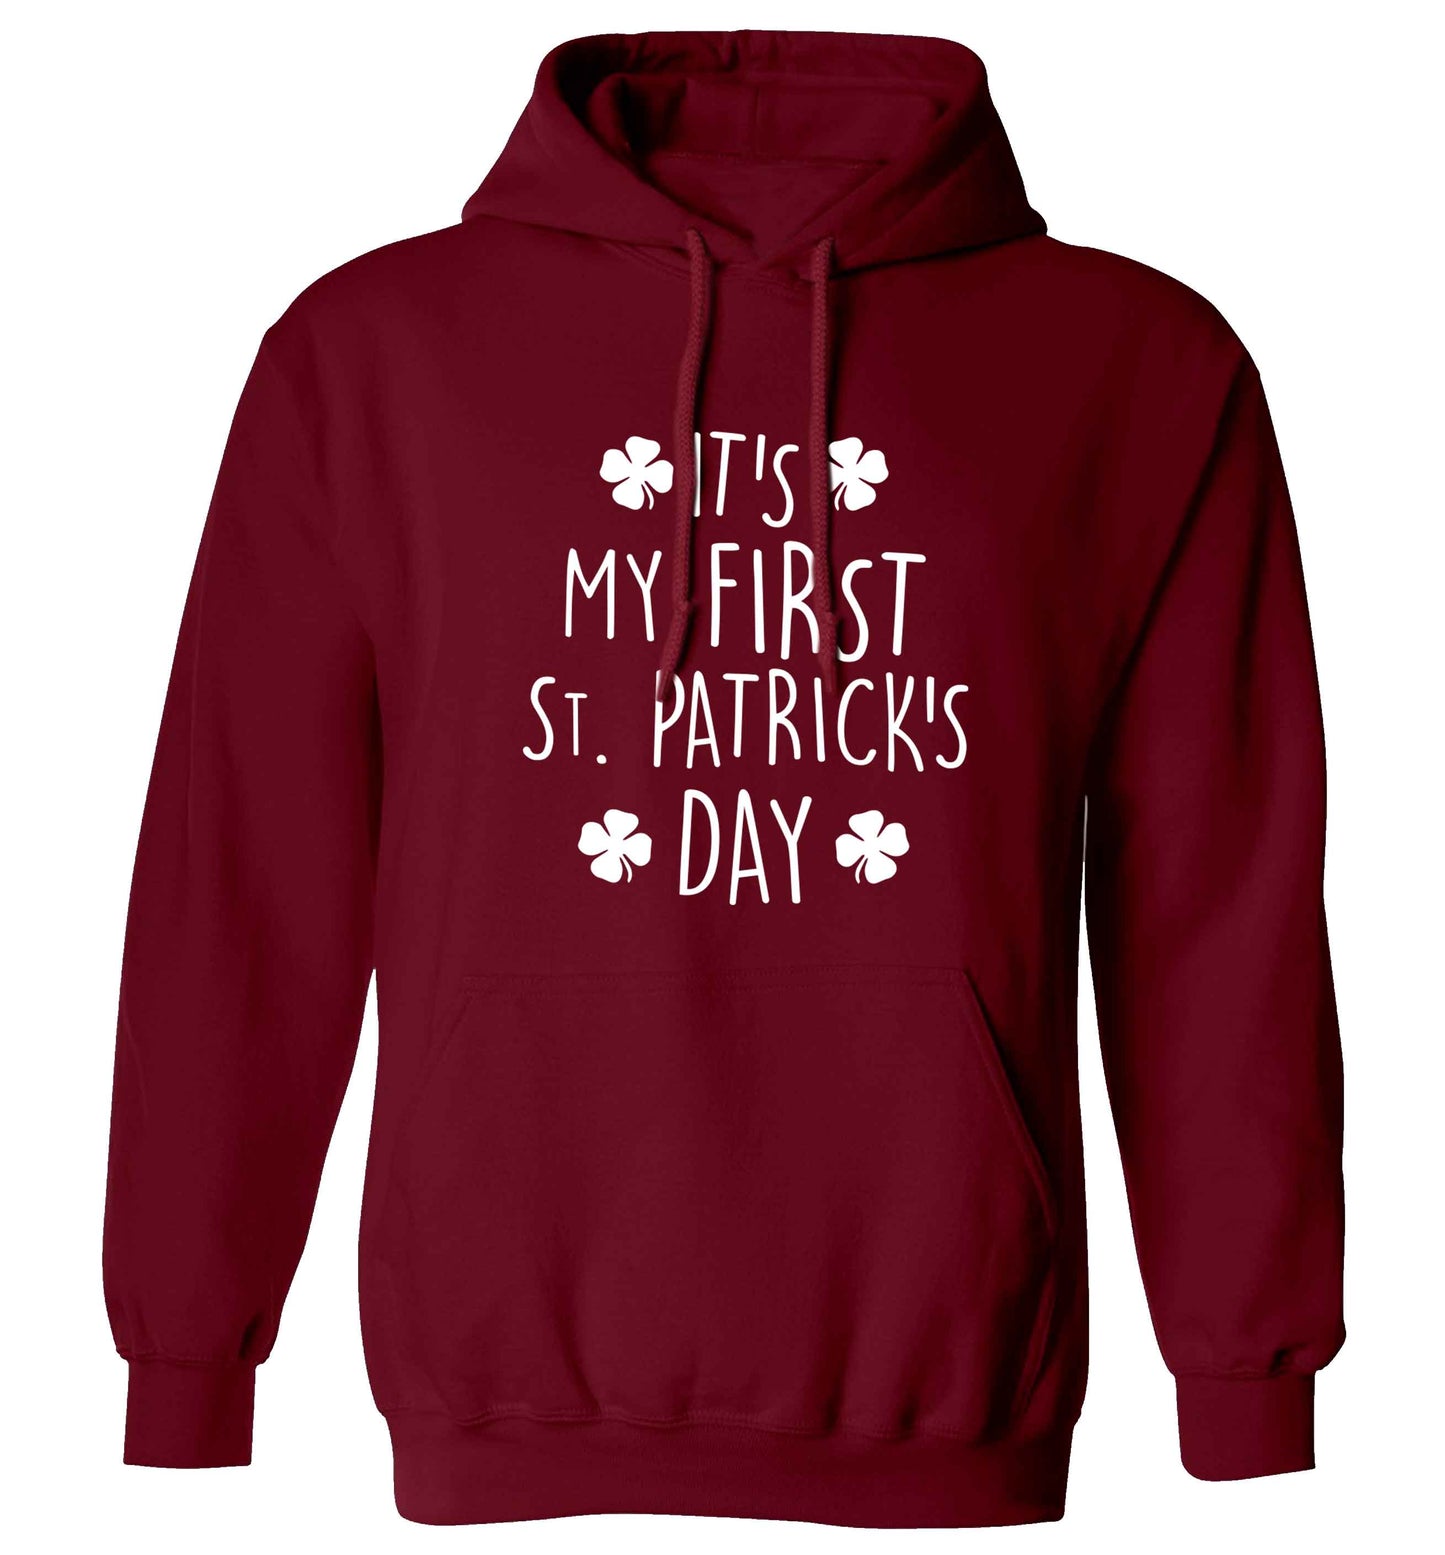 It's my first St.Patrick's day adults unisex maroon hoodie 2XL